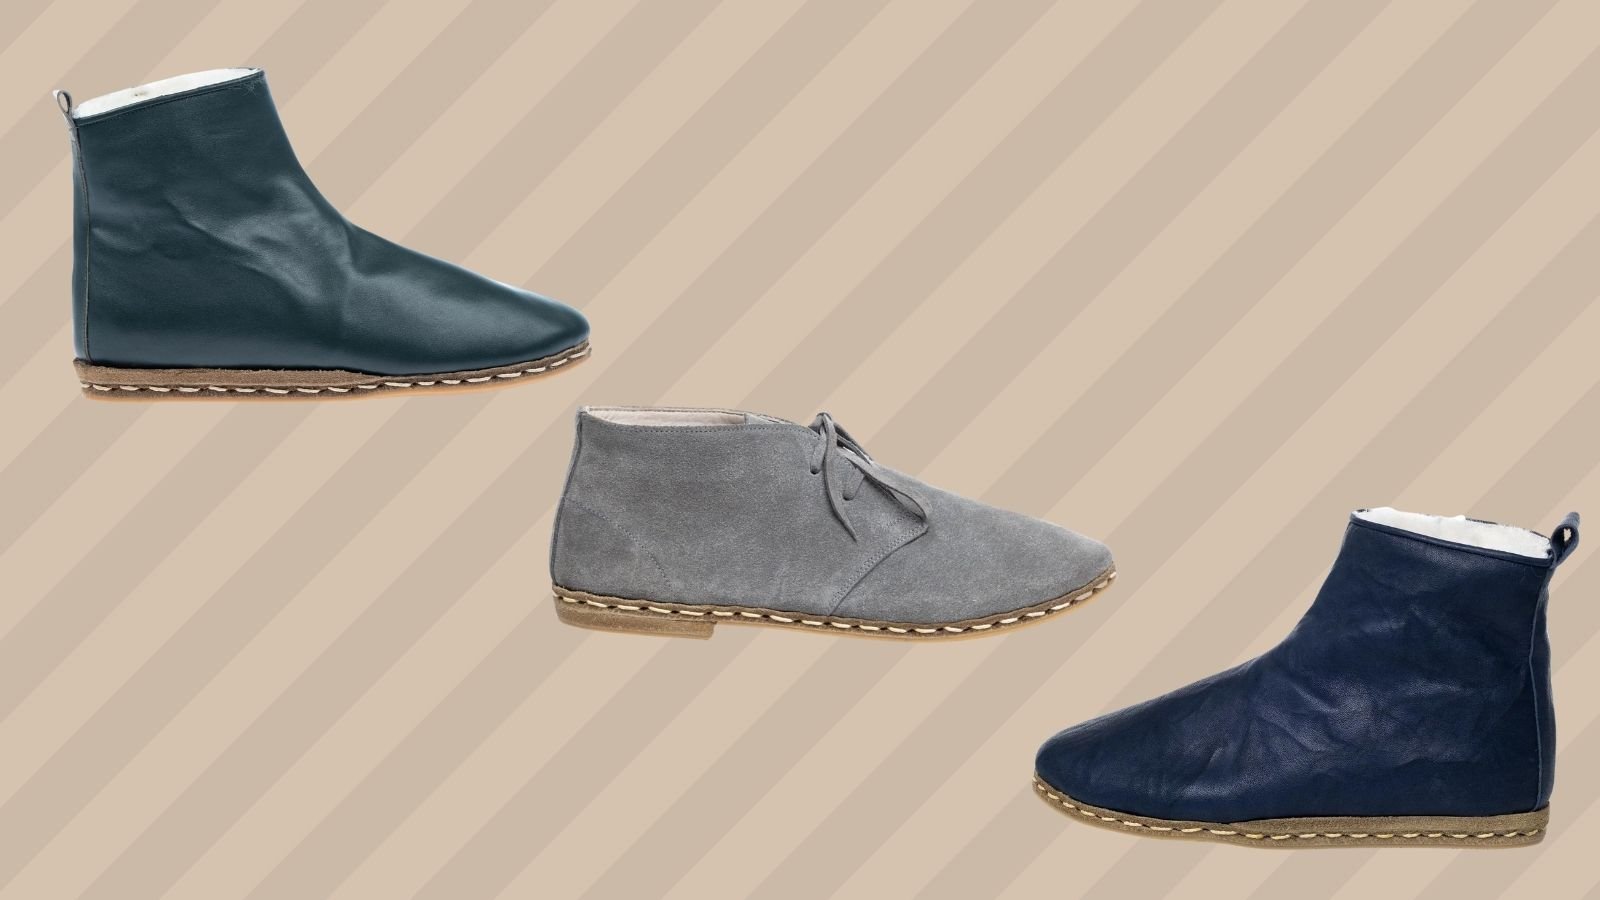 3 Types of Shoes Every Man Should Have - Boots